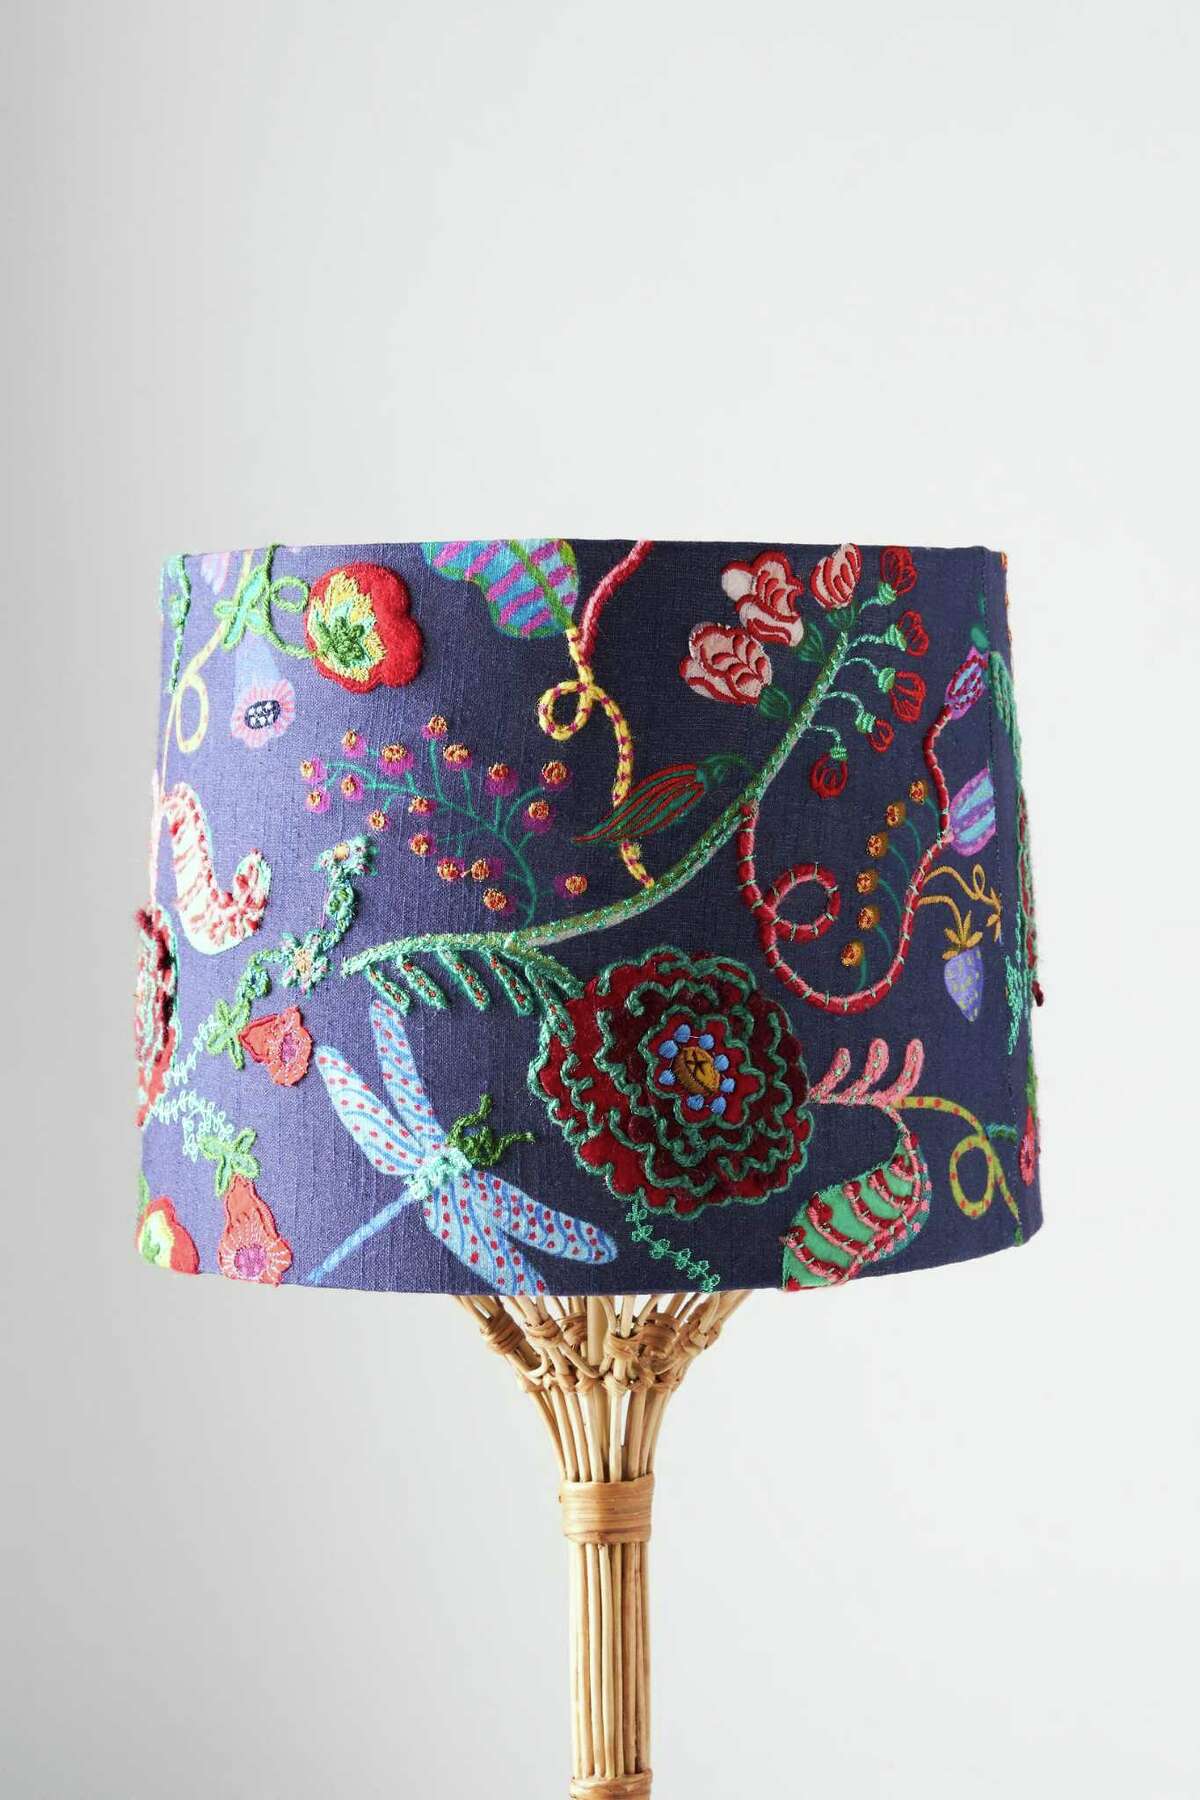 Embroidered Larson Lamp Shade, $128; Anthropologie stores